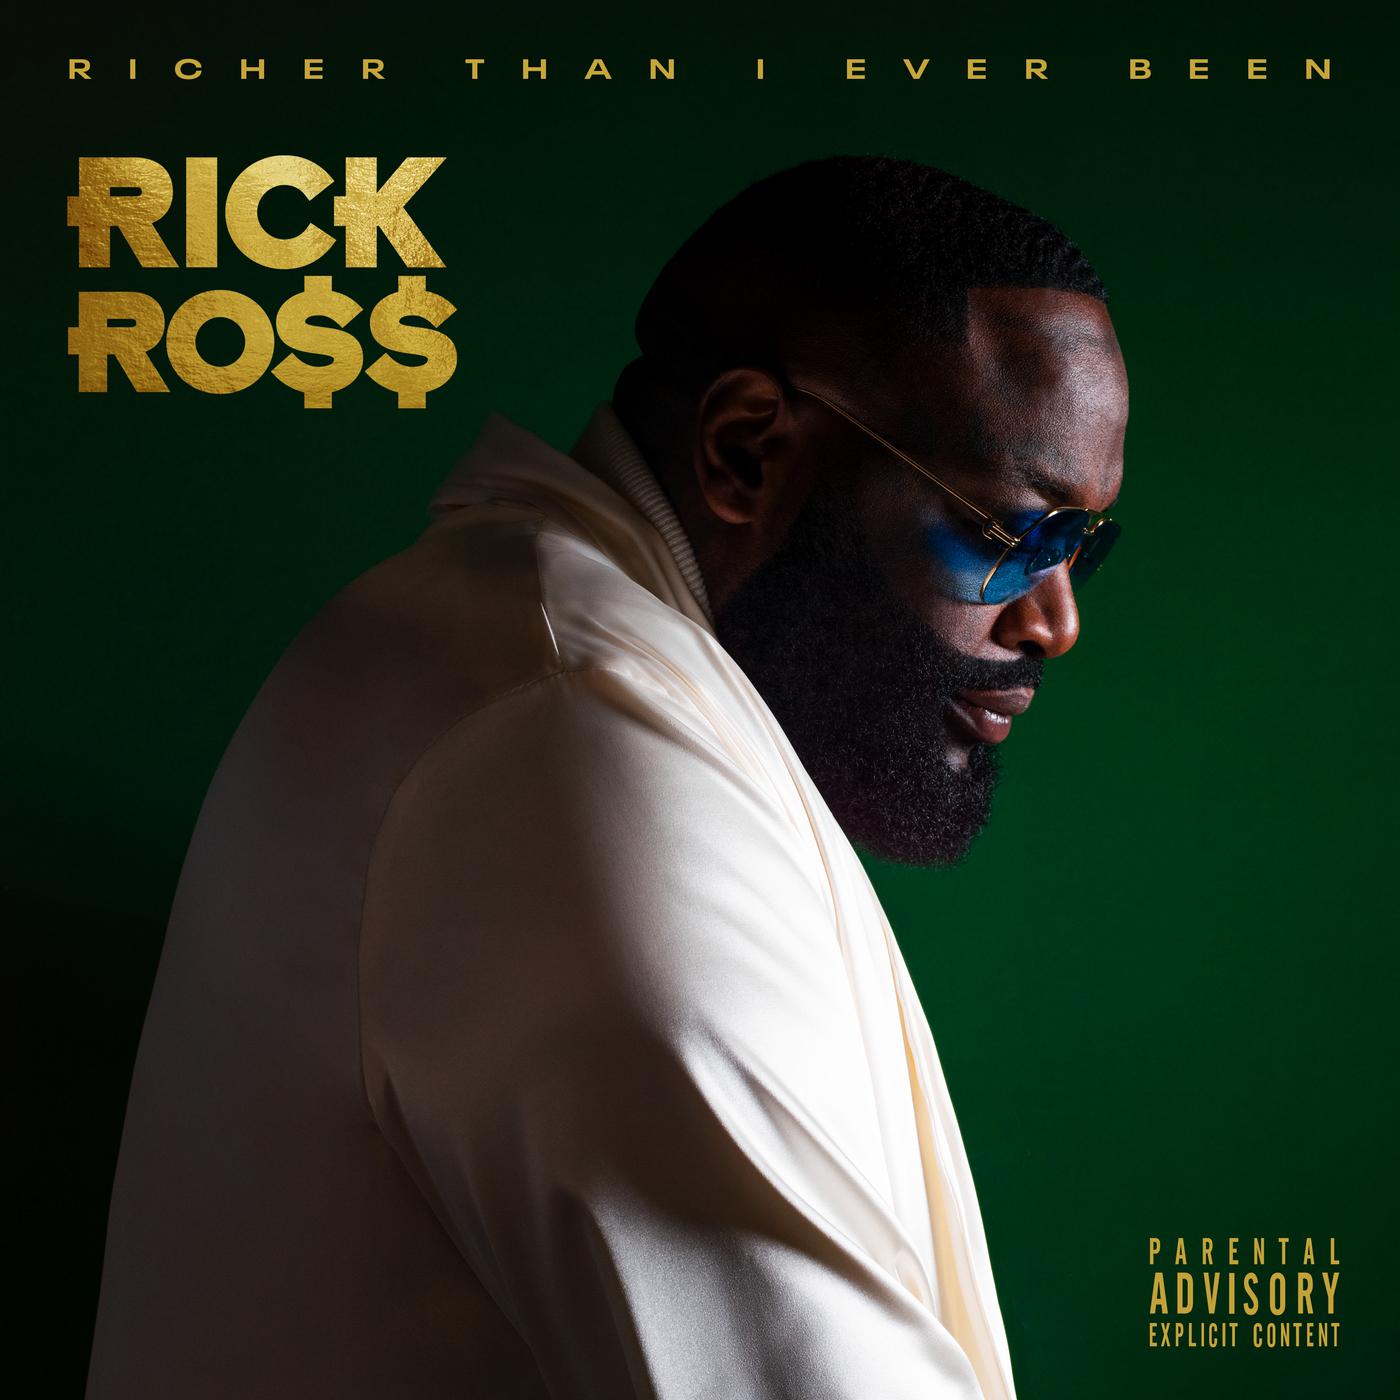 Warm Words in a Cold World歌词 歌手Rick Ross / Wale / Future-专辑Richer Than I Ever Been-单曲《Warm Words in a Cold World》LRC歌词下载